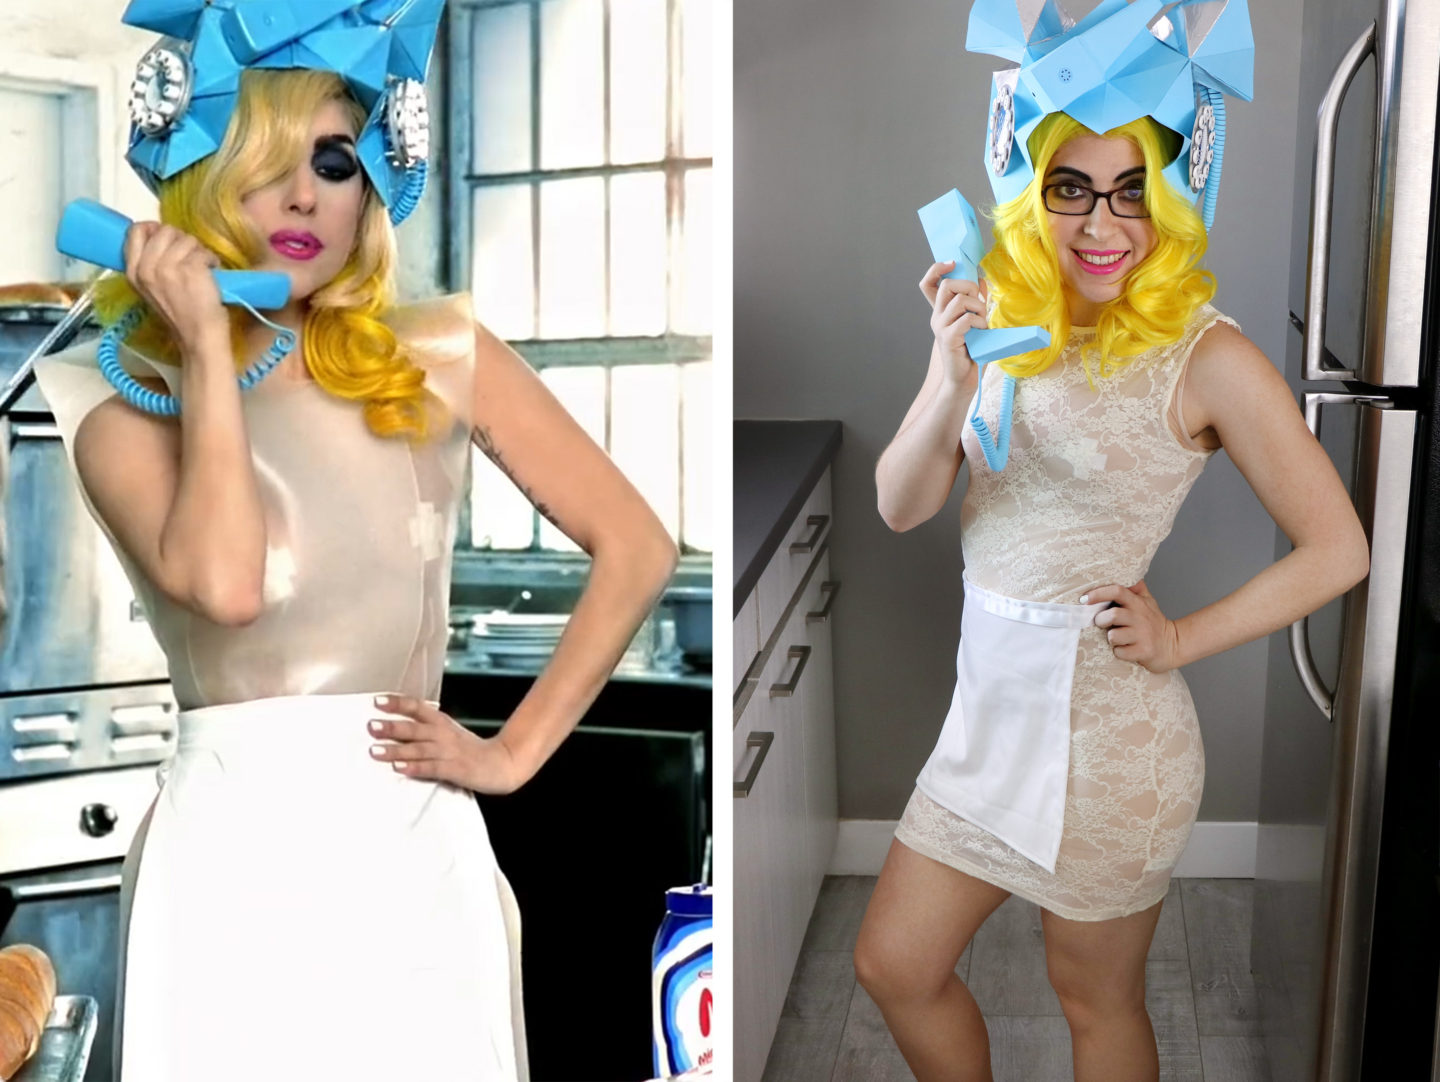 I’m so happy to be sharing my Halloween costume today - Lady Gaga from the....